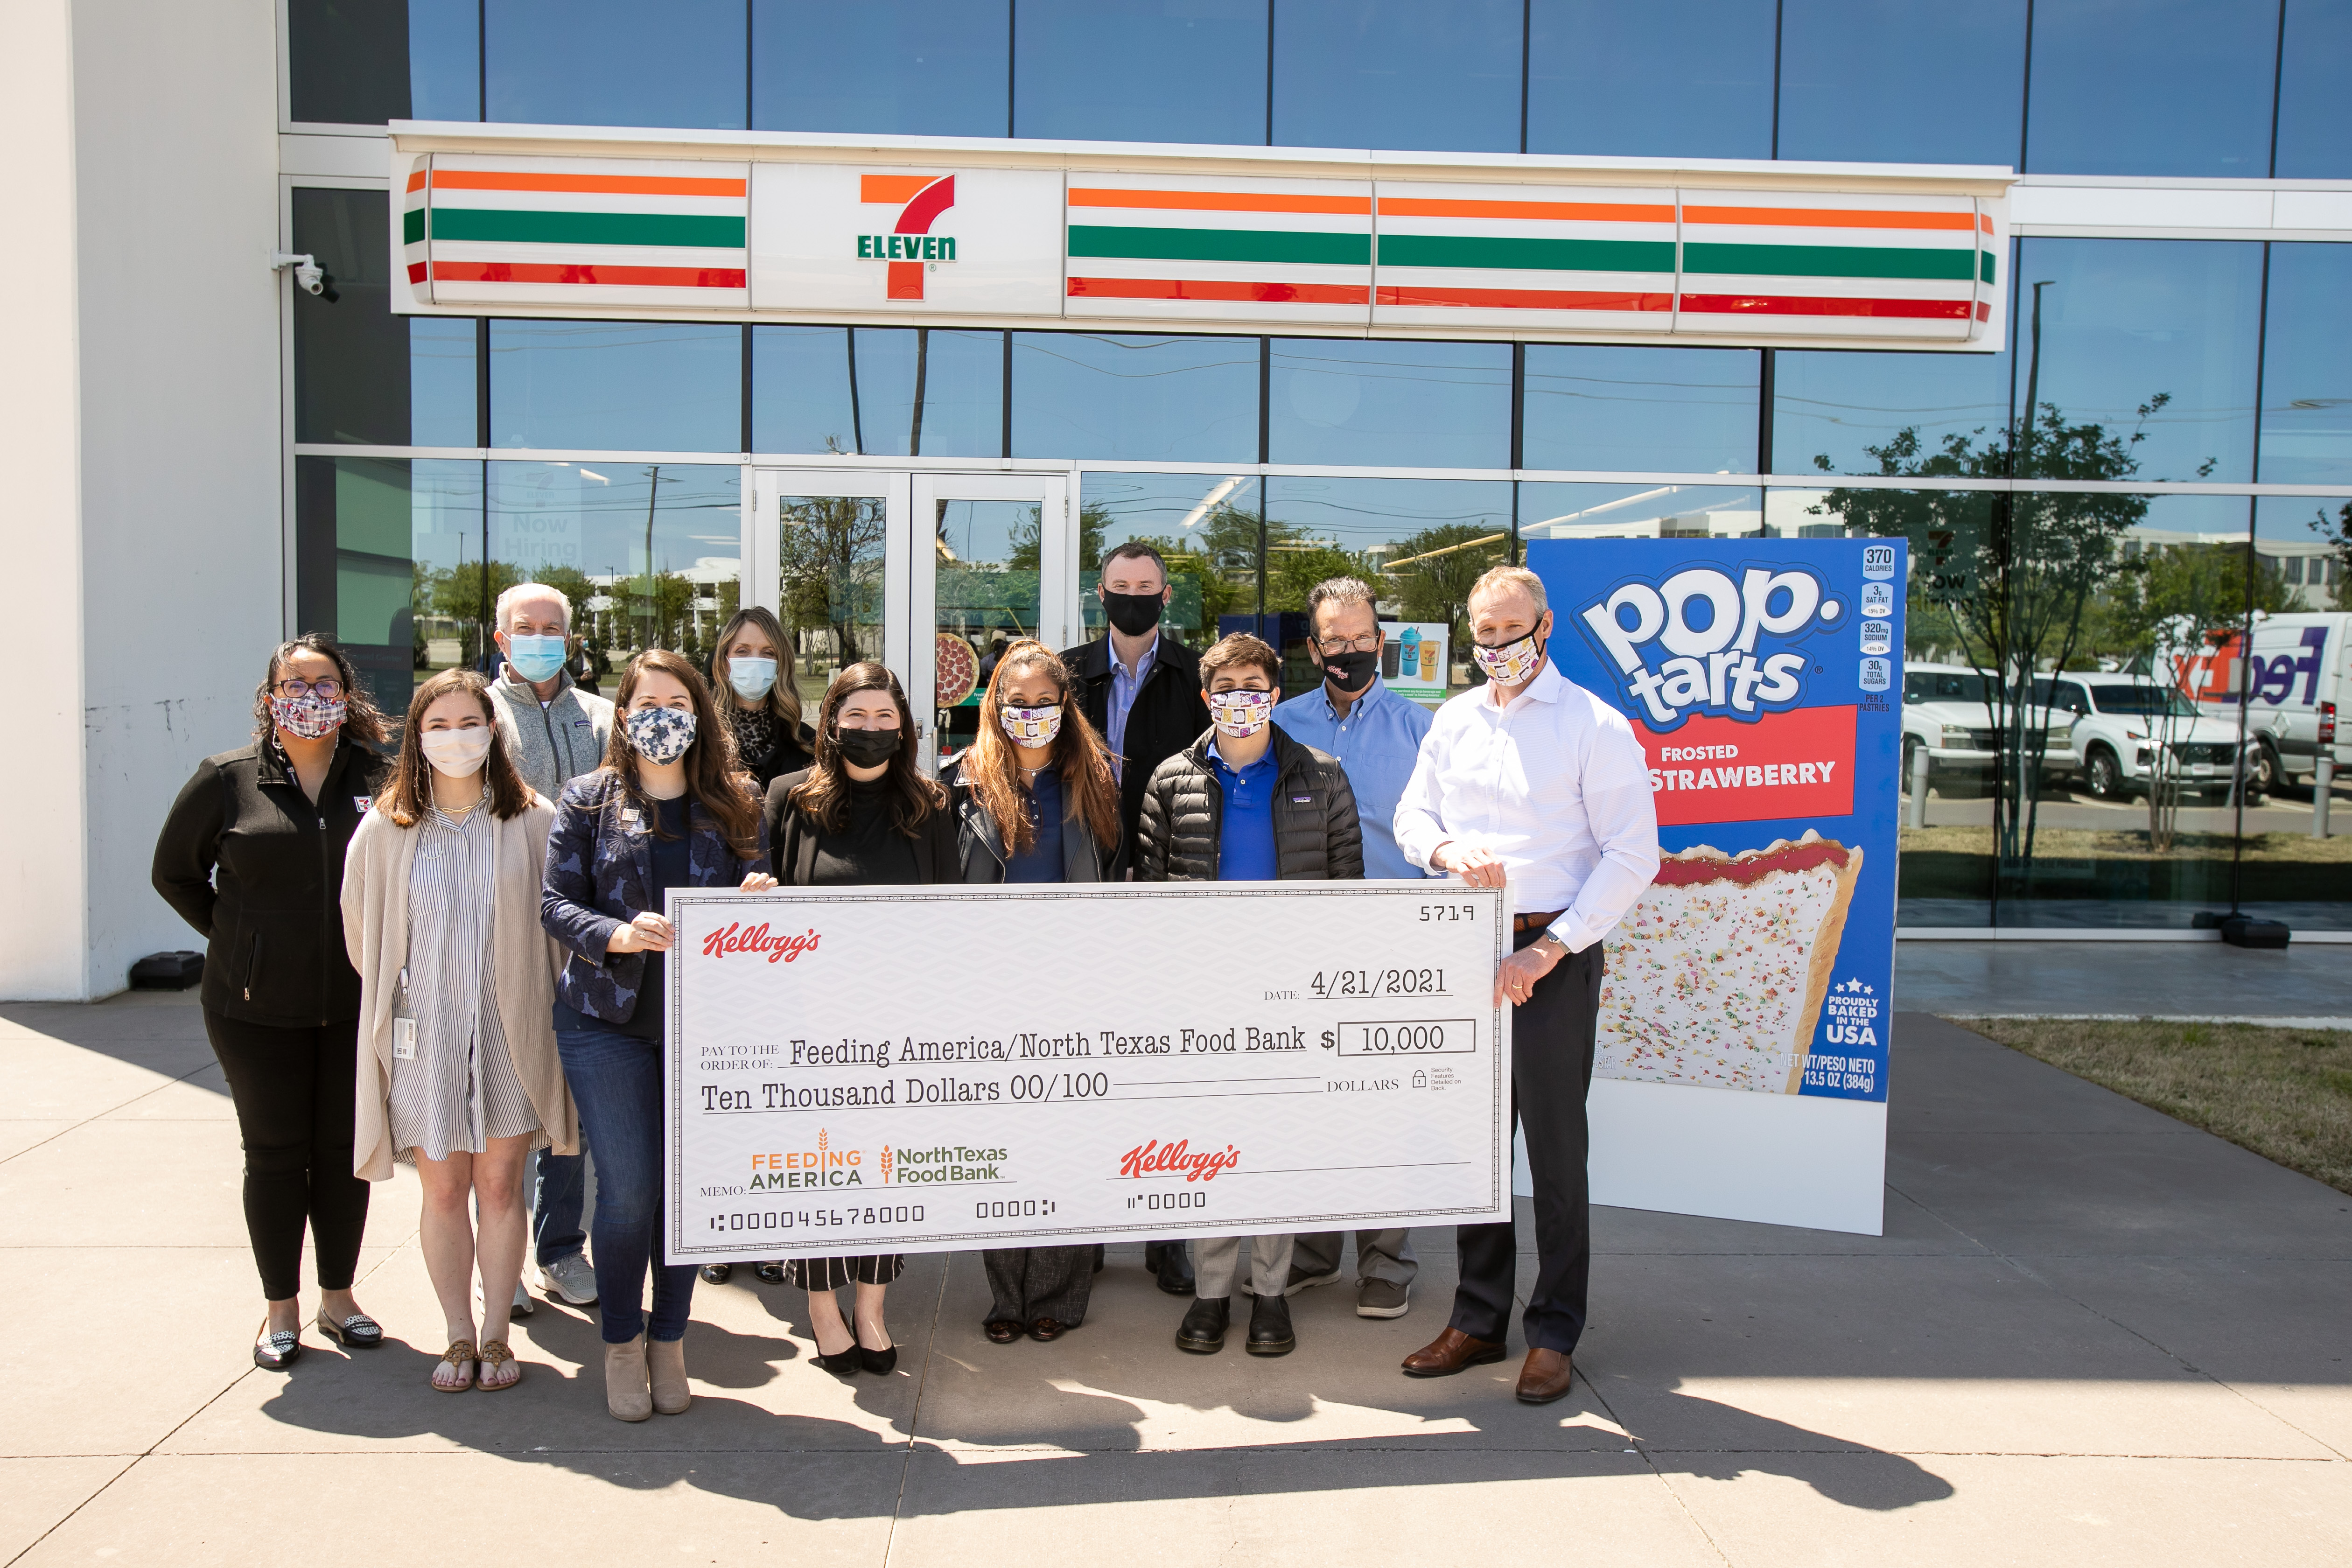 Kellogg also supported a 7-Eleven Feeding America campaign by donating 10-cents for every participating cereal or snack purchased at 7-Eleven® stores between April 14-20. As a result of the promotion, Kellogg also presented a $10,000 check to help provide critical nourishment to the North Texas communities that were impacted by February’s severe winter storm and those continuing to feel the effects of the COVID-19 pandemic. In total, the equivalent of more than 34,000 meals were donated to North Texas Food Bank.